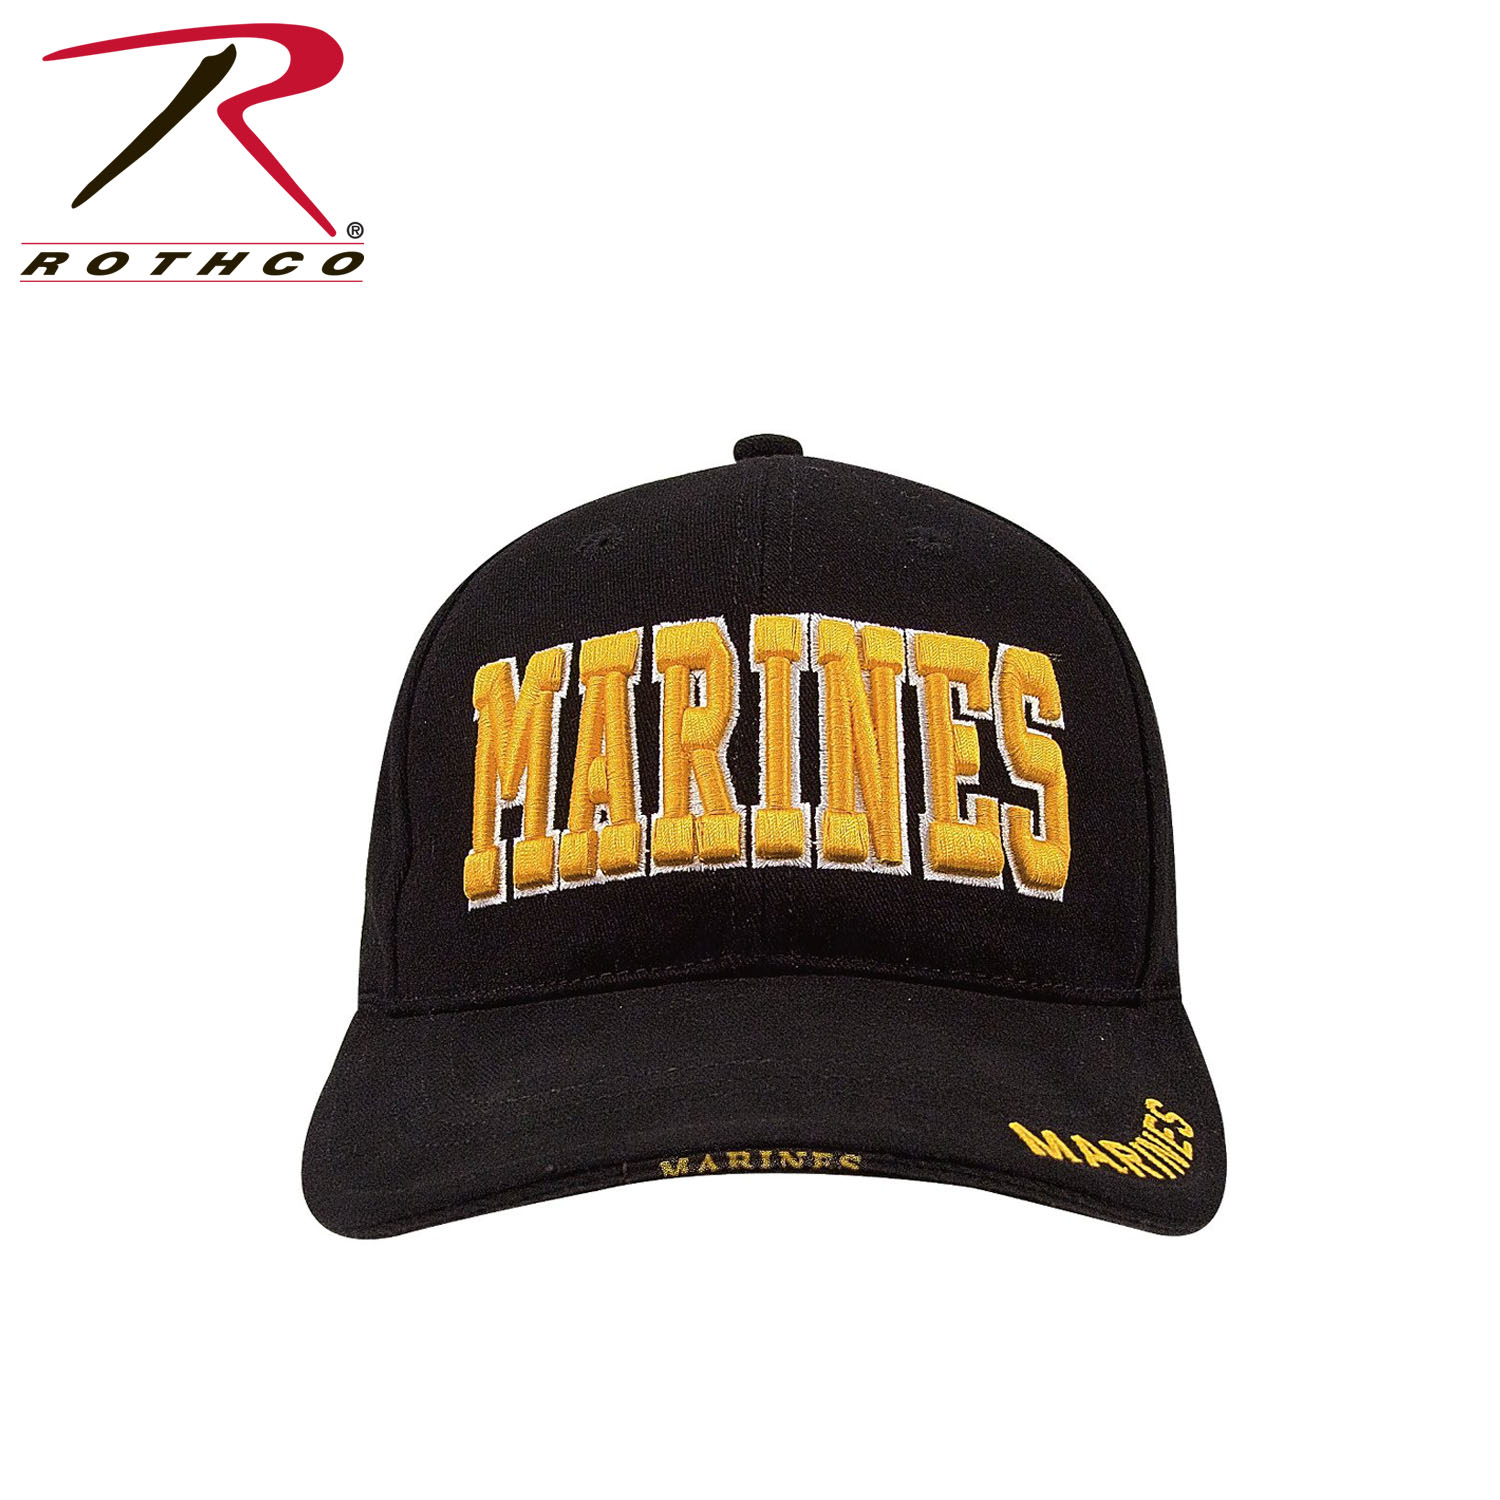 Ball Cap-Black with Gold Marines